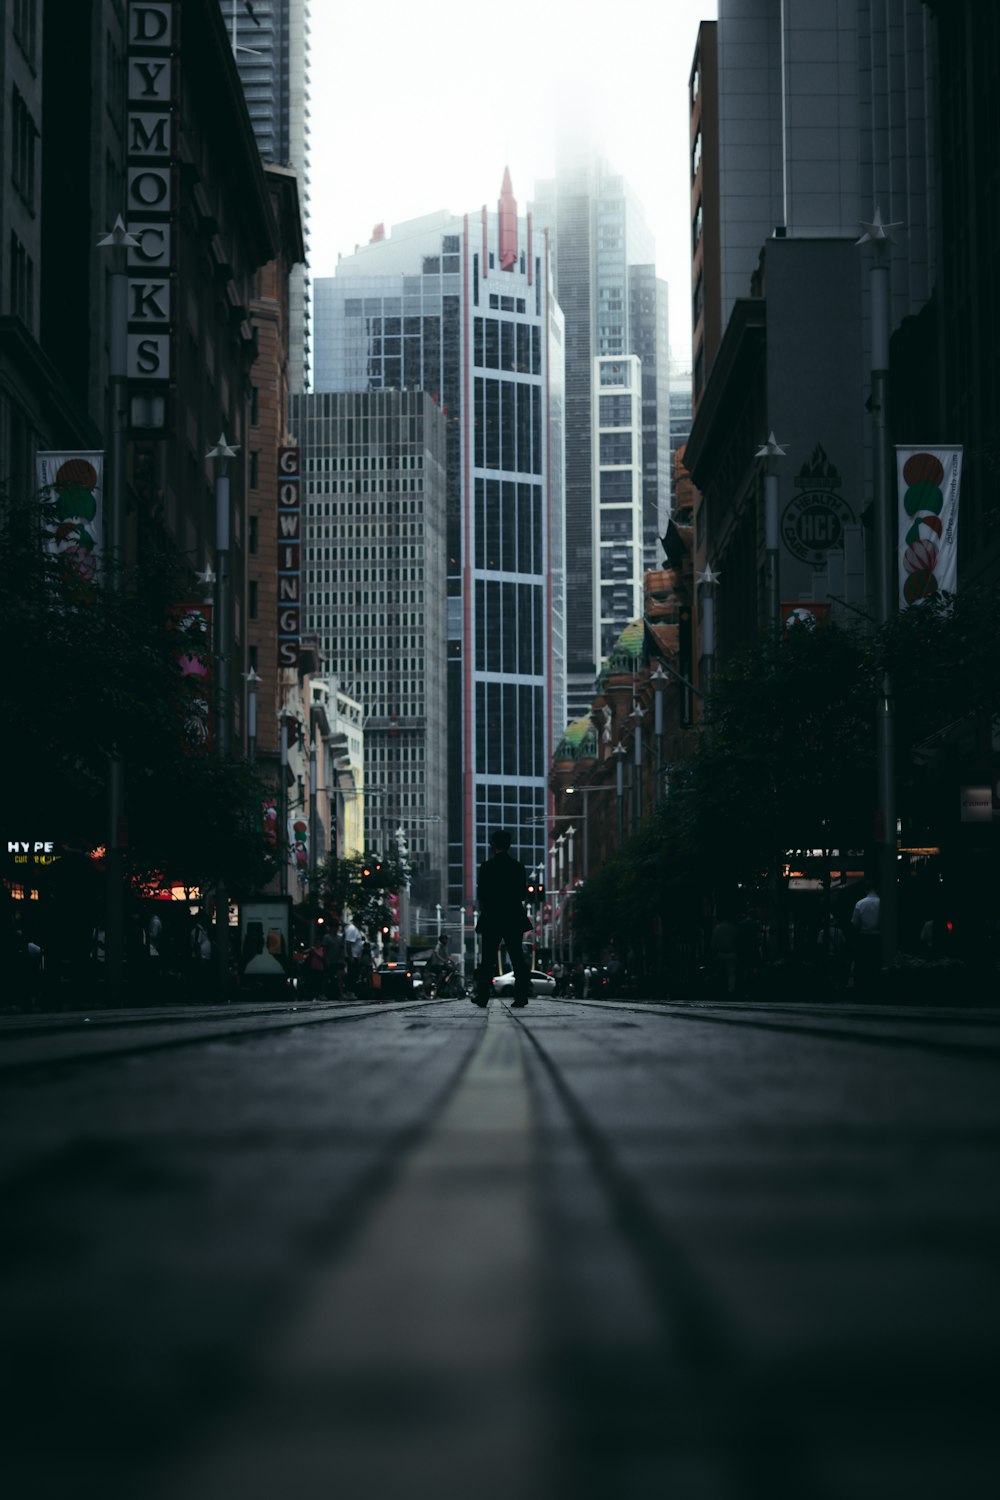 1K+ Low Angle Pictures | Download Free Images on Unsplash